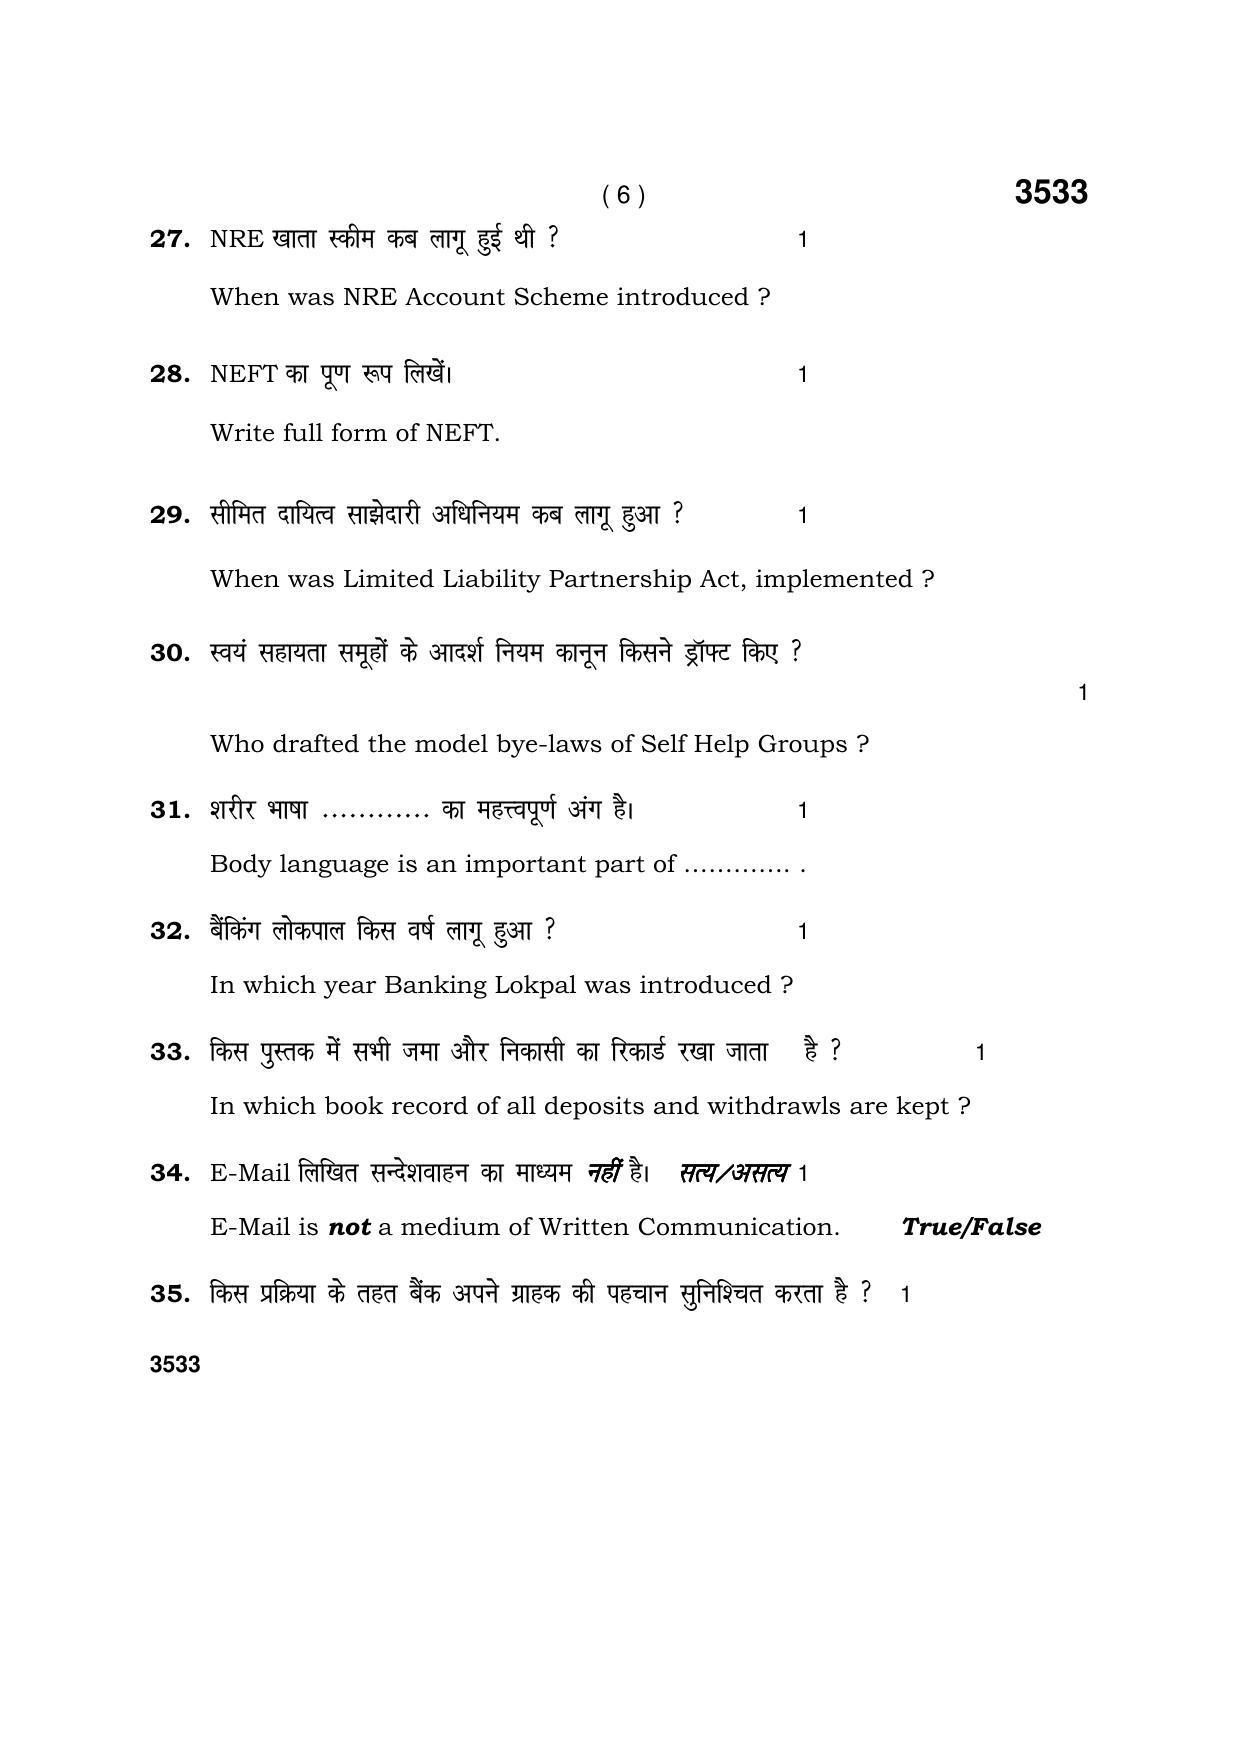 Haryana Board HBSE Class 10 Banking & Financial Services 2018 Question Paper - Page 6